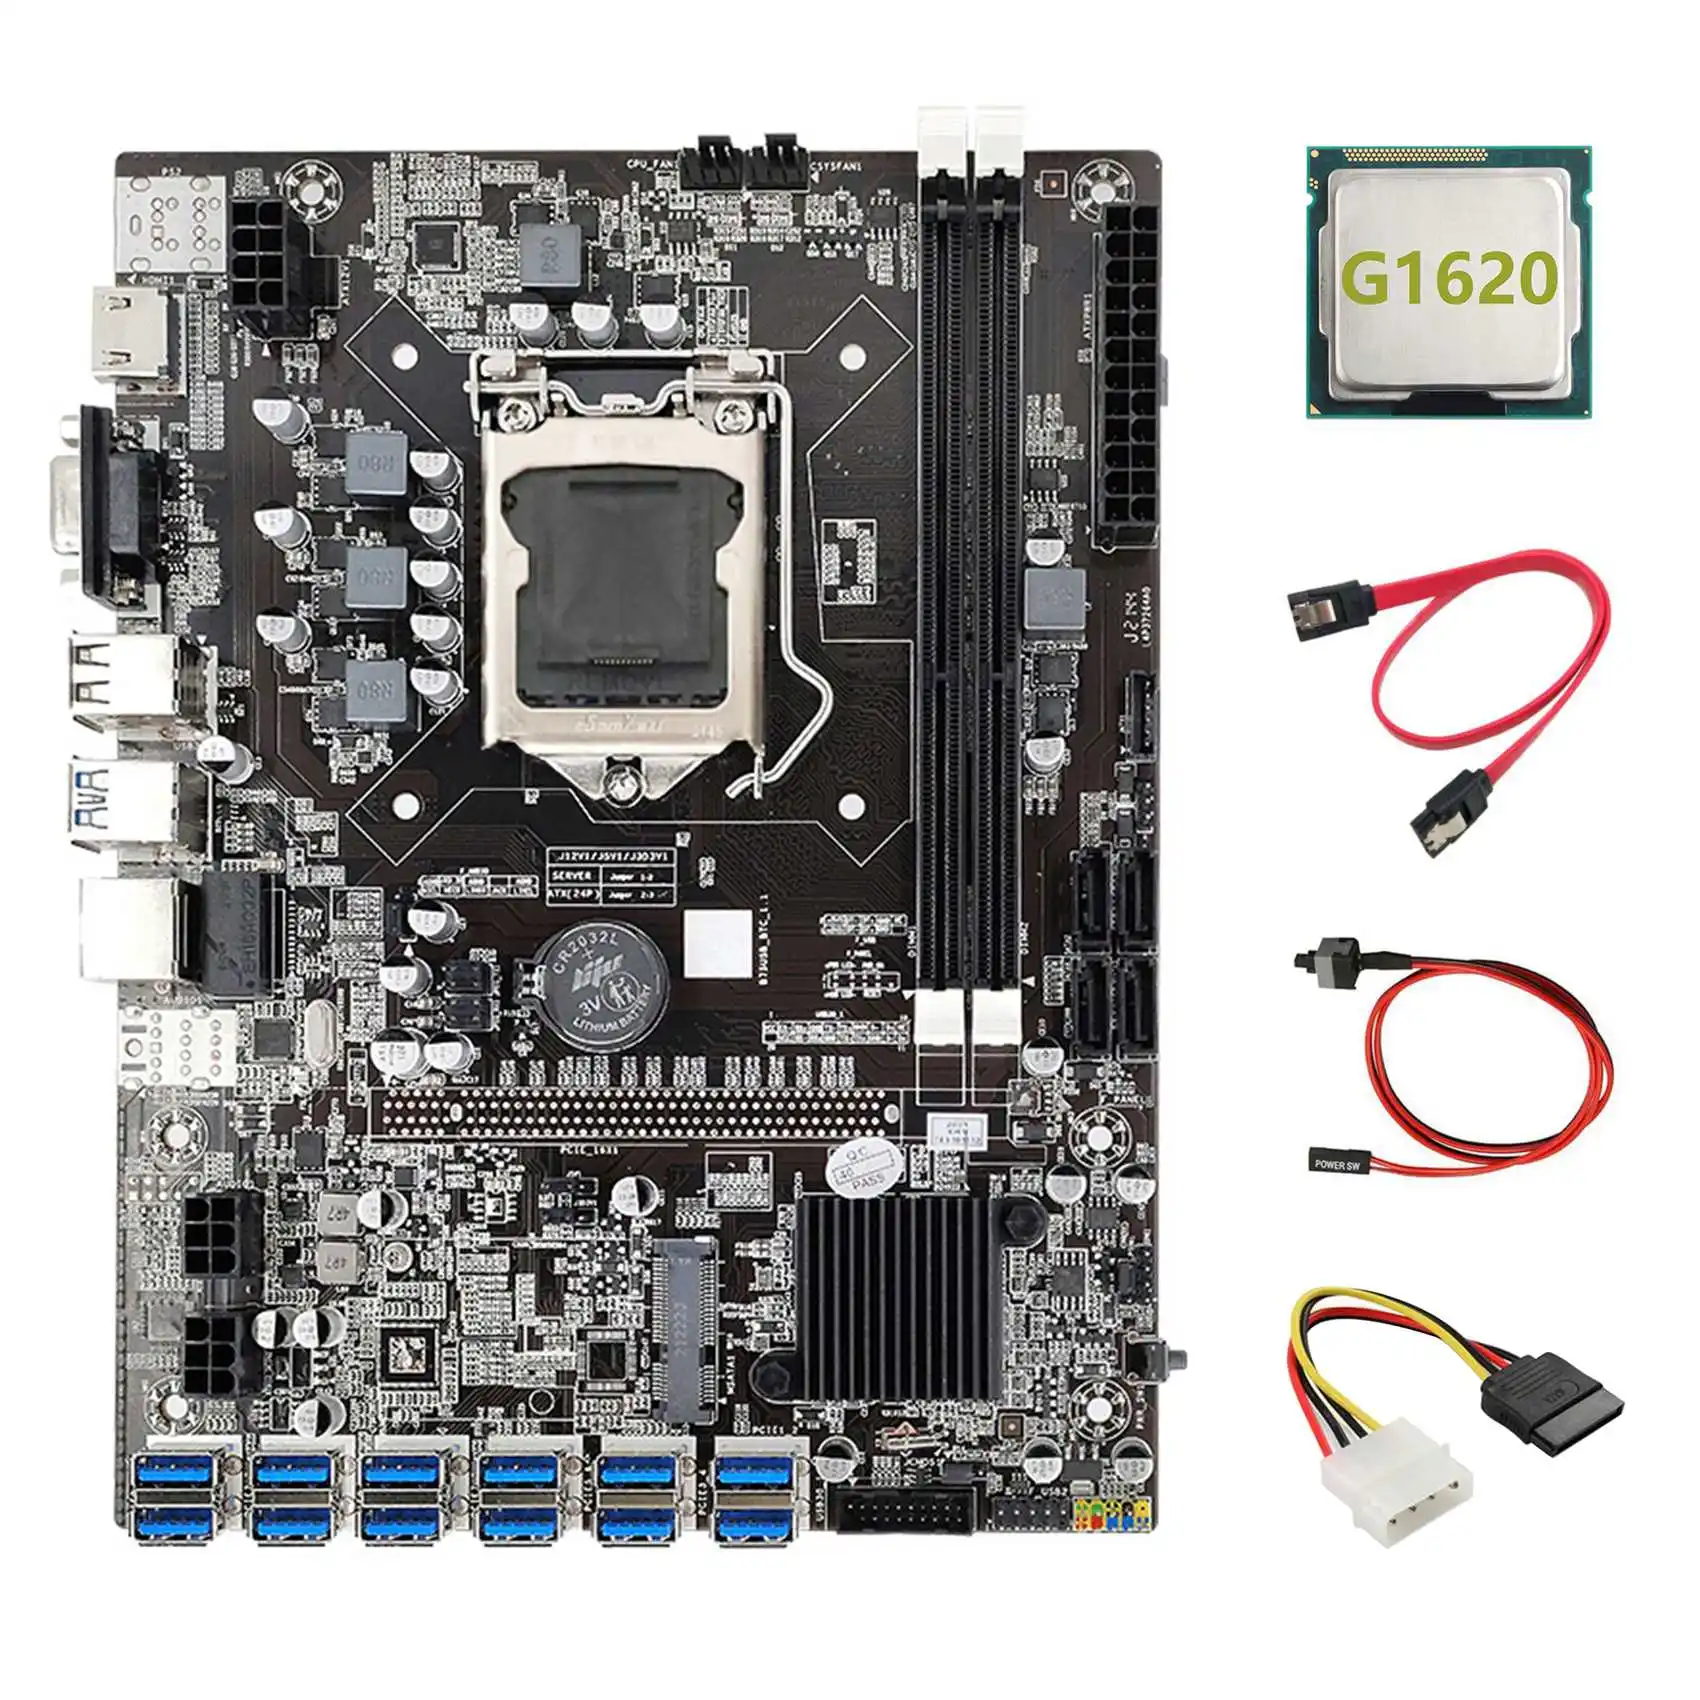 B75 ETH Miner Motherboard 12 PCIE to USB3.0+G1620 CPU+4PIN IDE to SATA Cable+SATA Cable+Switch Cable LGA1155 Motherboard